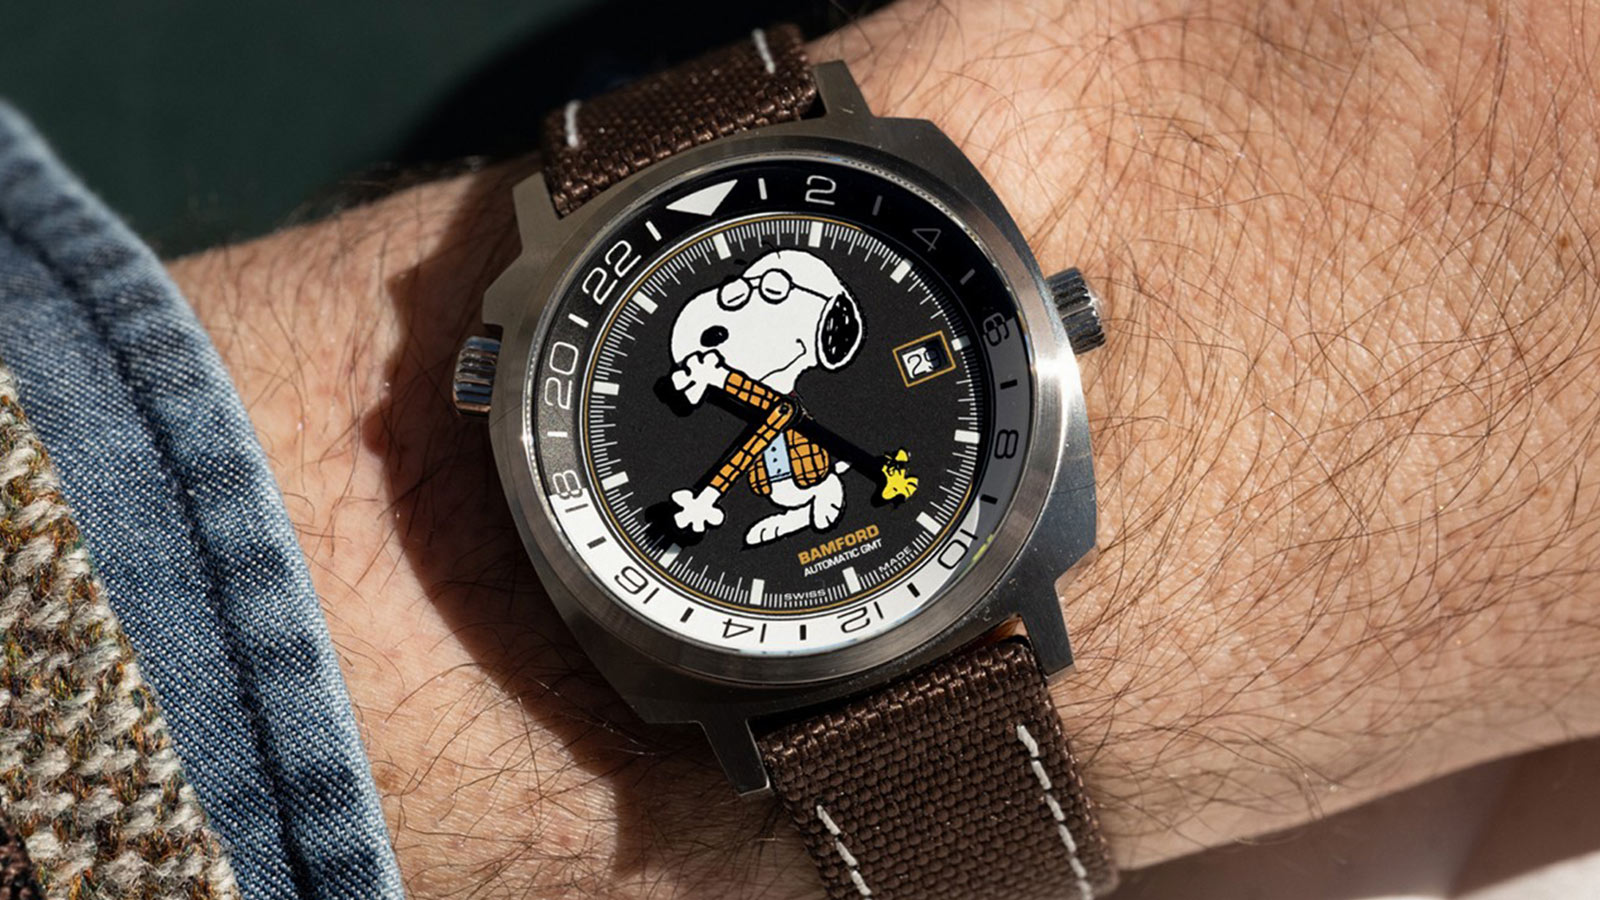 Peanuts “Joe Preppy” GMT Limited Edition For HODINKEE